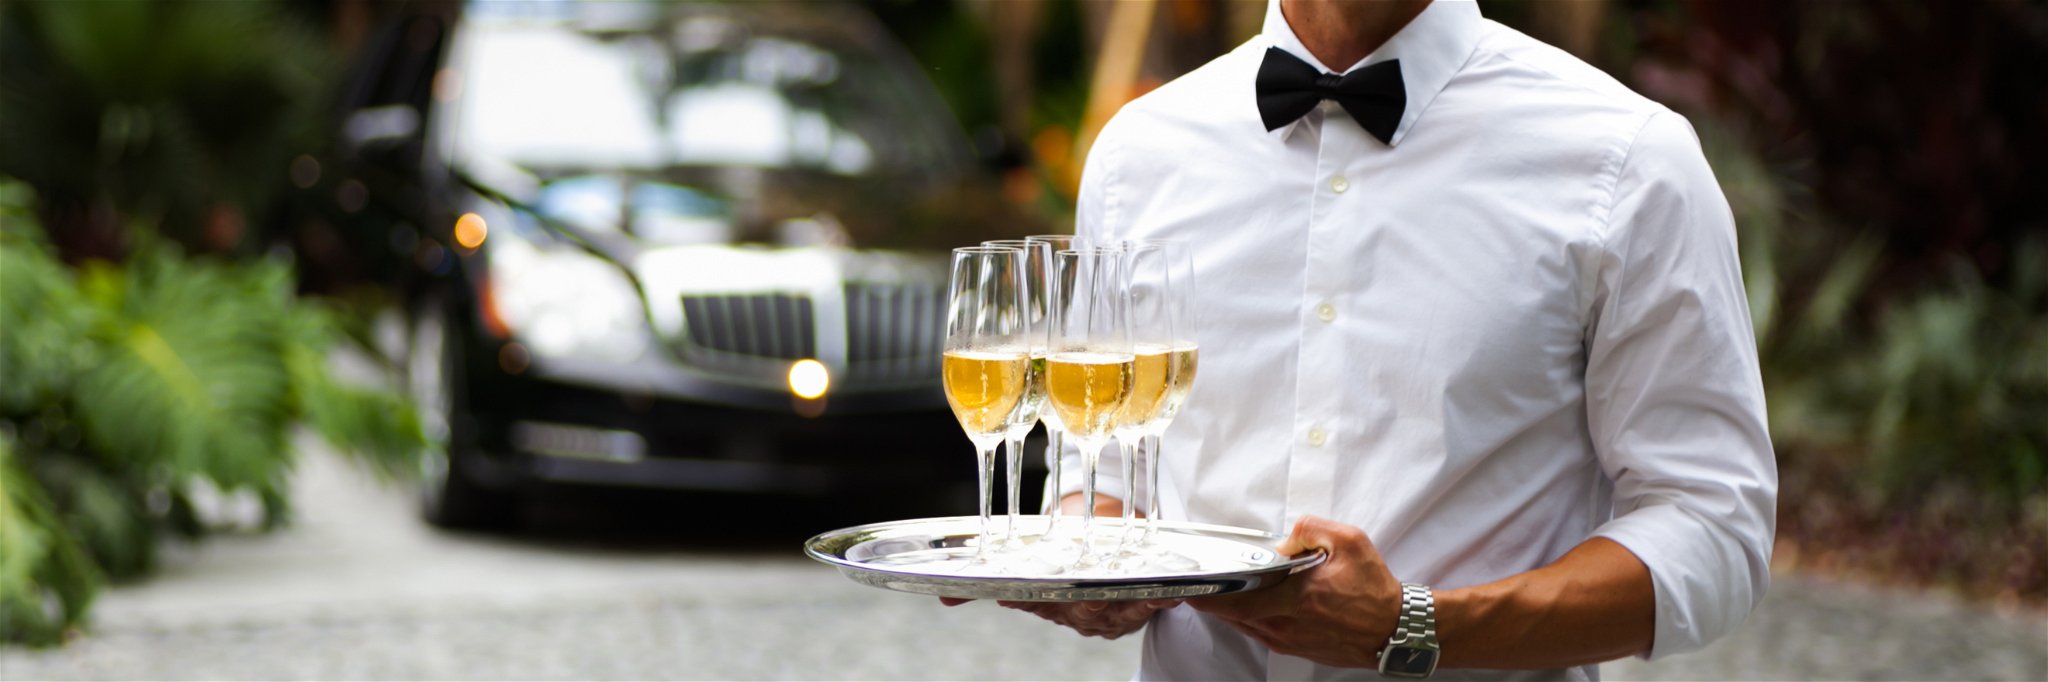 The EU has banned the export of luxury cars and Champagne to Russia.